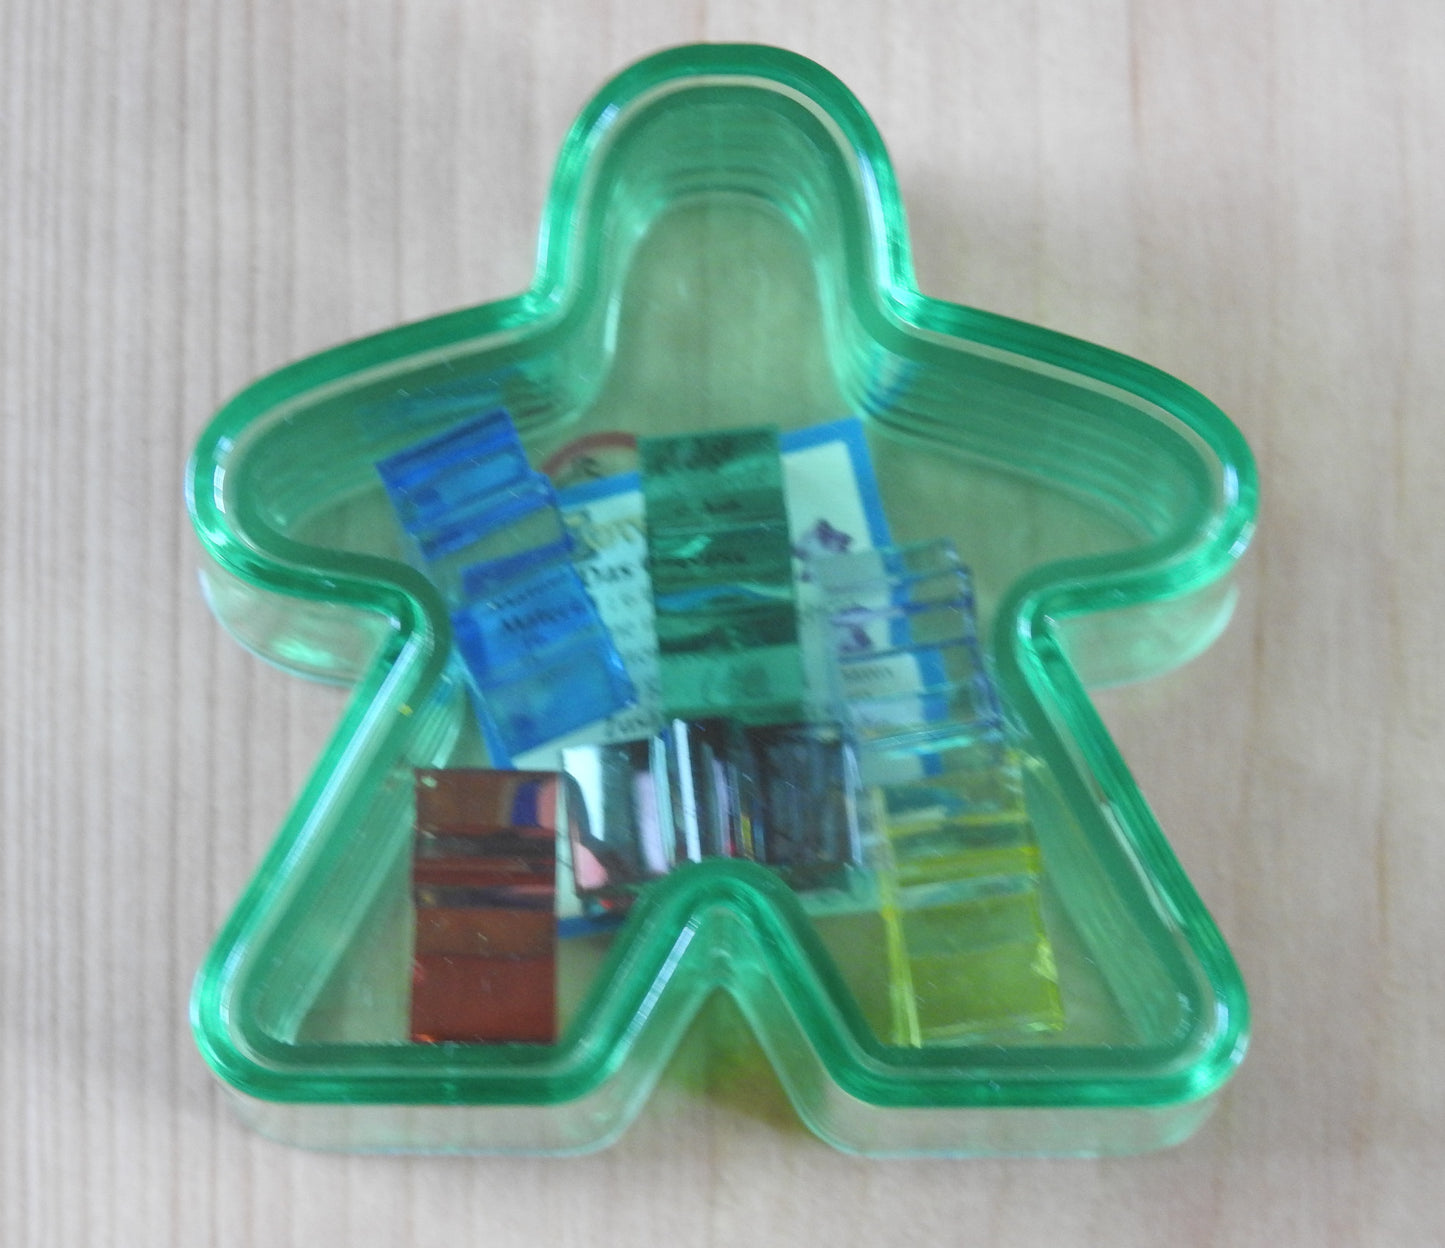 Green Meeple box with the six mini meeples shown inside!